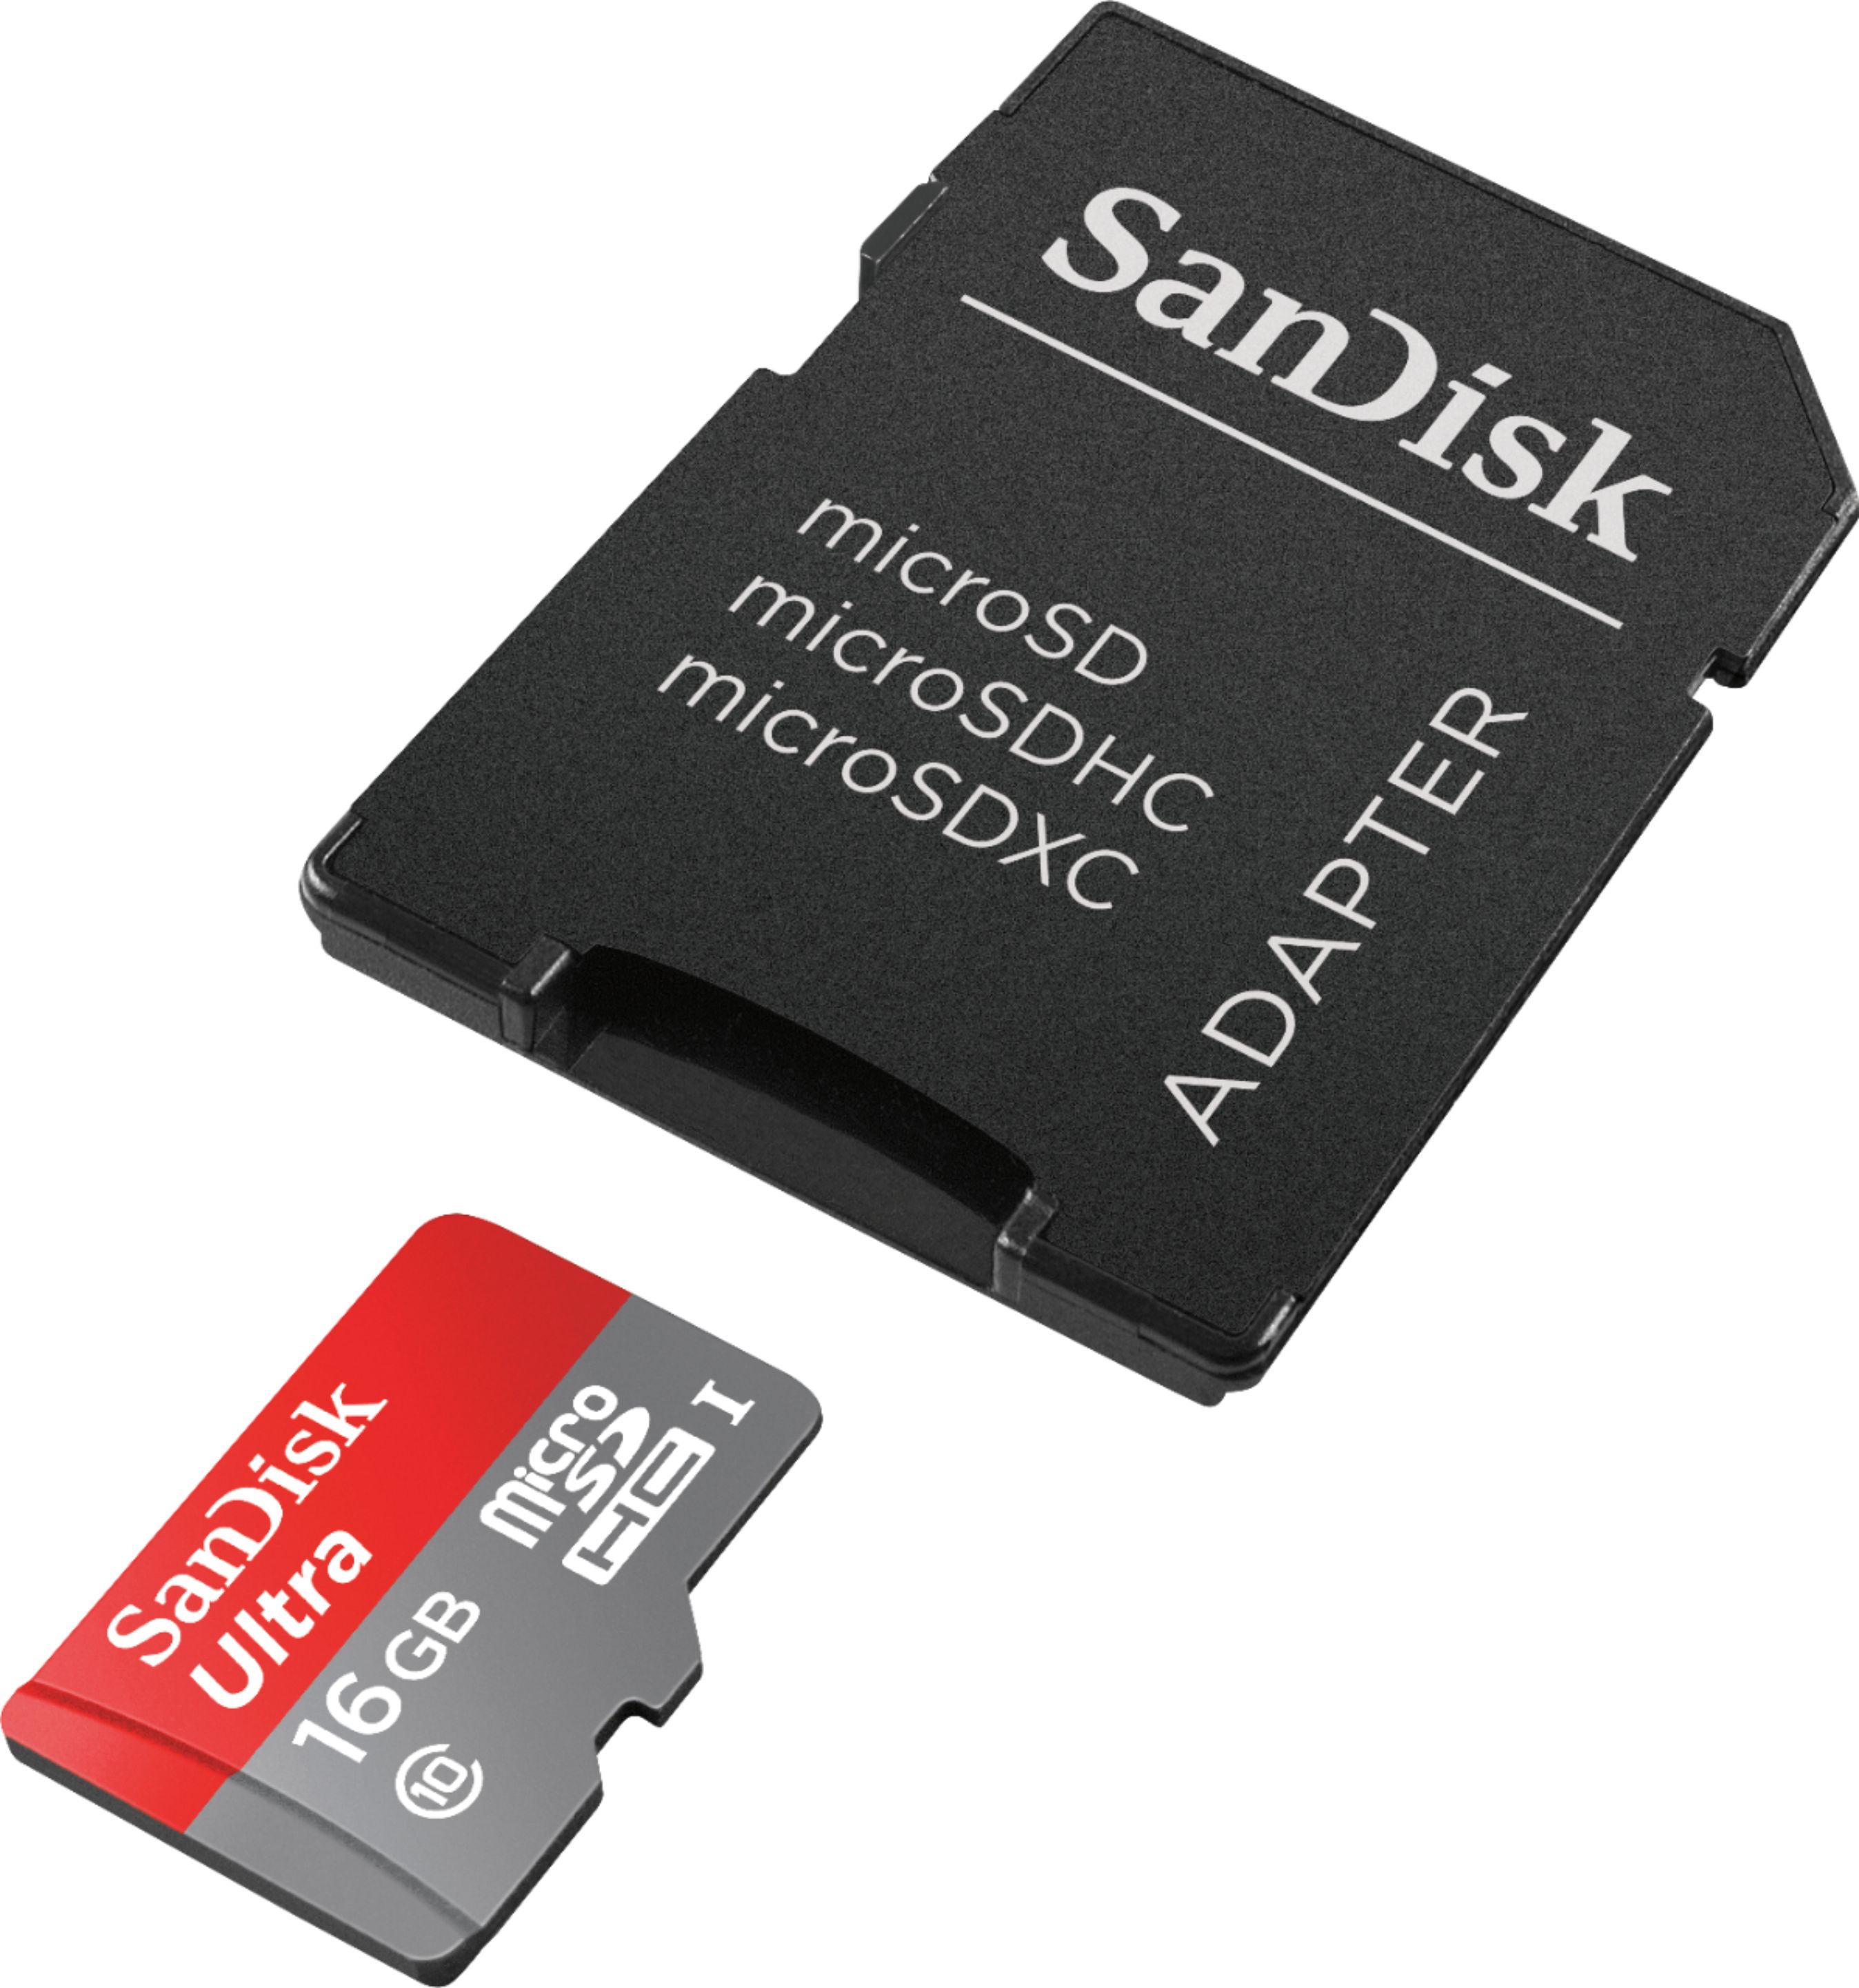 SANDISK ULTRA MICRO SD 16GB CLASS 10 SD SDHC MEMORY CARD ADAPTER 